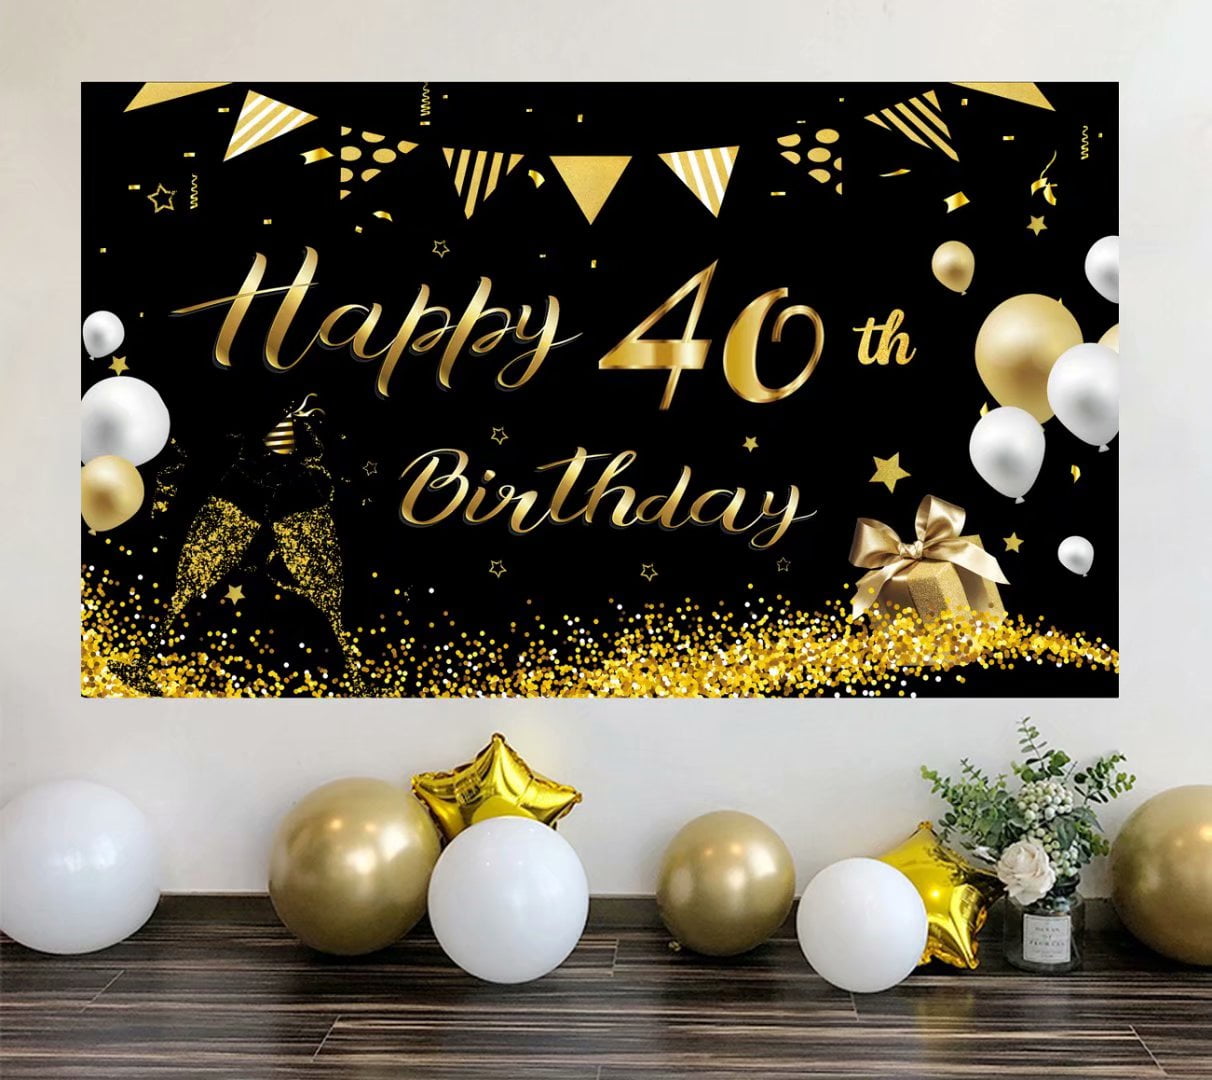 40th Birthday Phoetya 40th Birthday Background,Happy Birthday Backdrop Banner,Extra Large Fabric Black Gold Sign Poster,40th Birthday Party Supplies,47 x 31 Inch 